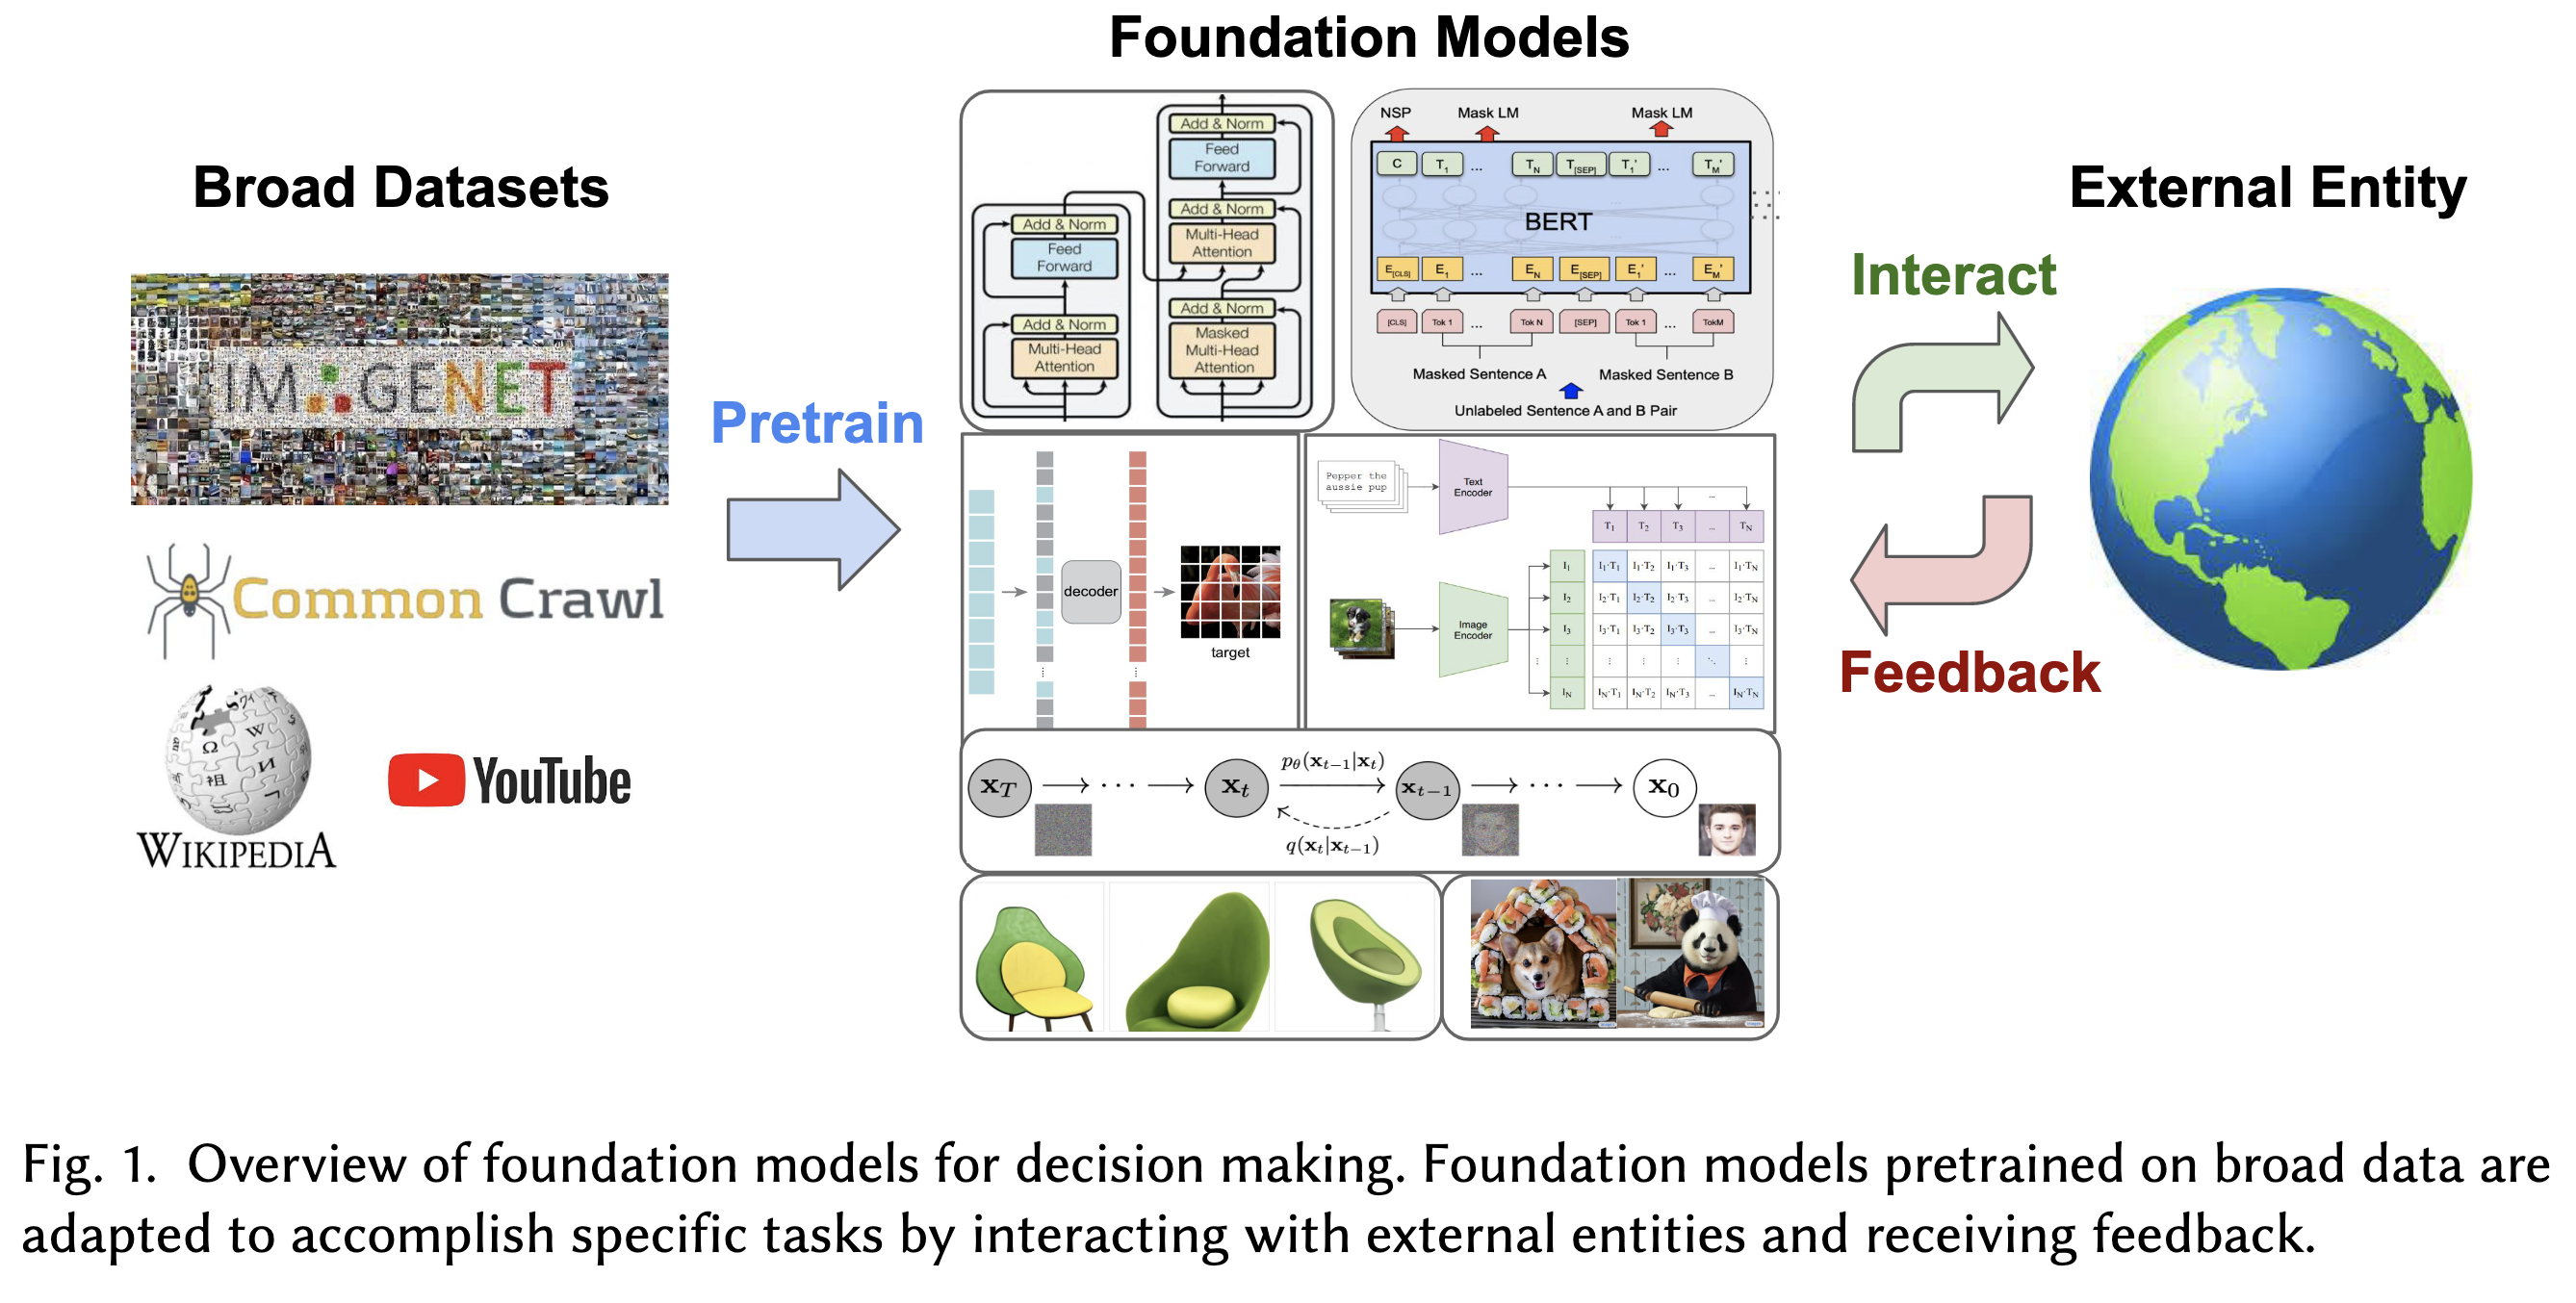 Foundation Models for Decision Making: Problems, Methods, and
  Opportunities